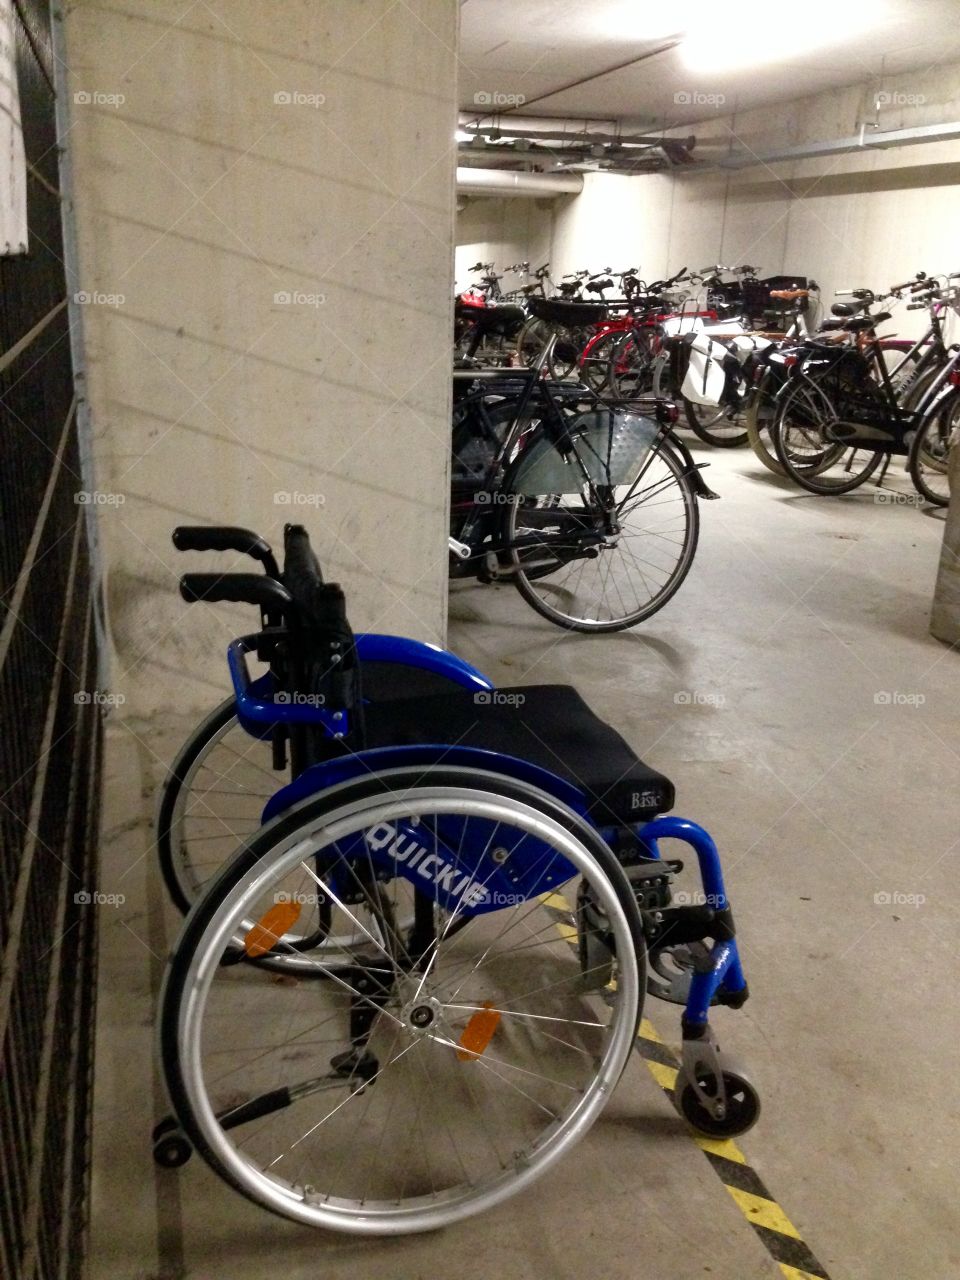 Parked wheelchair in the bicycle parking garage.